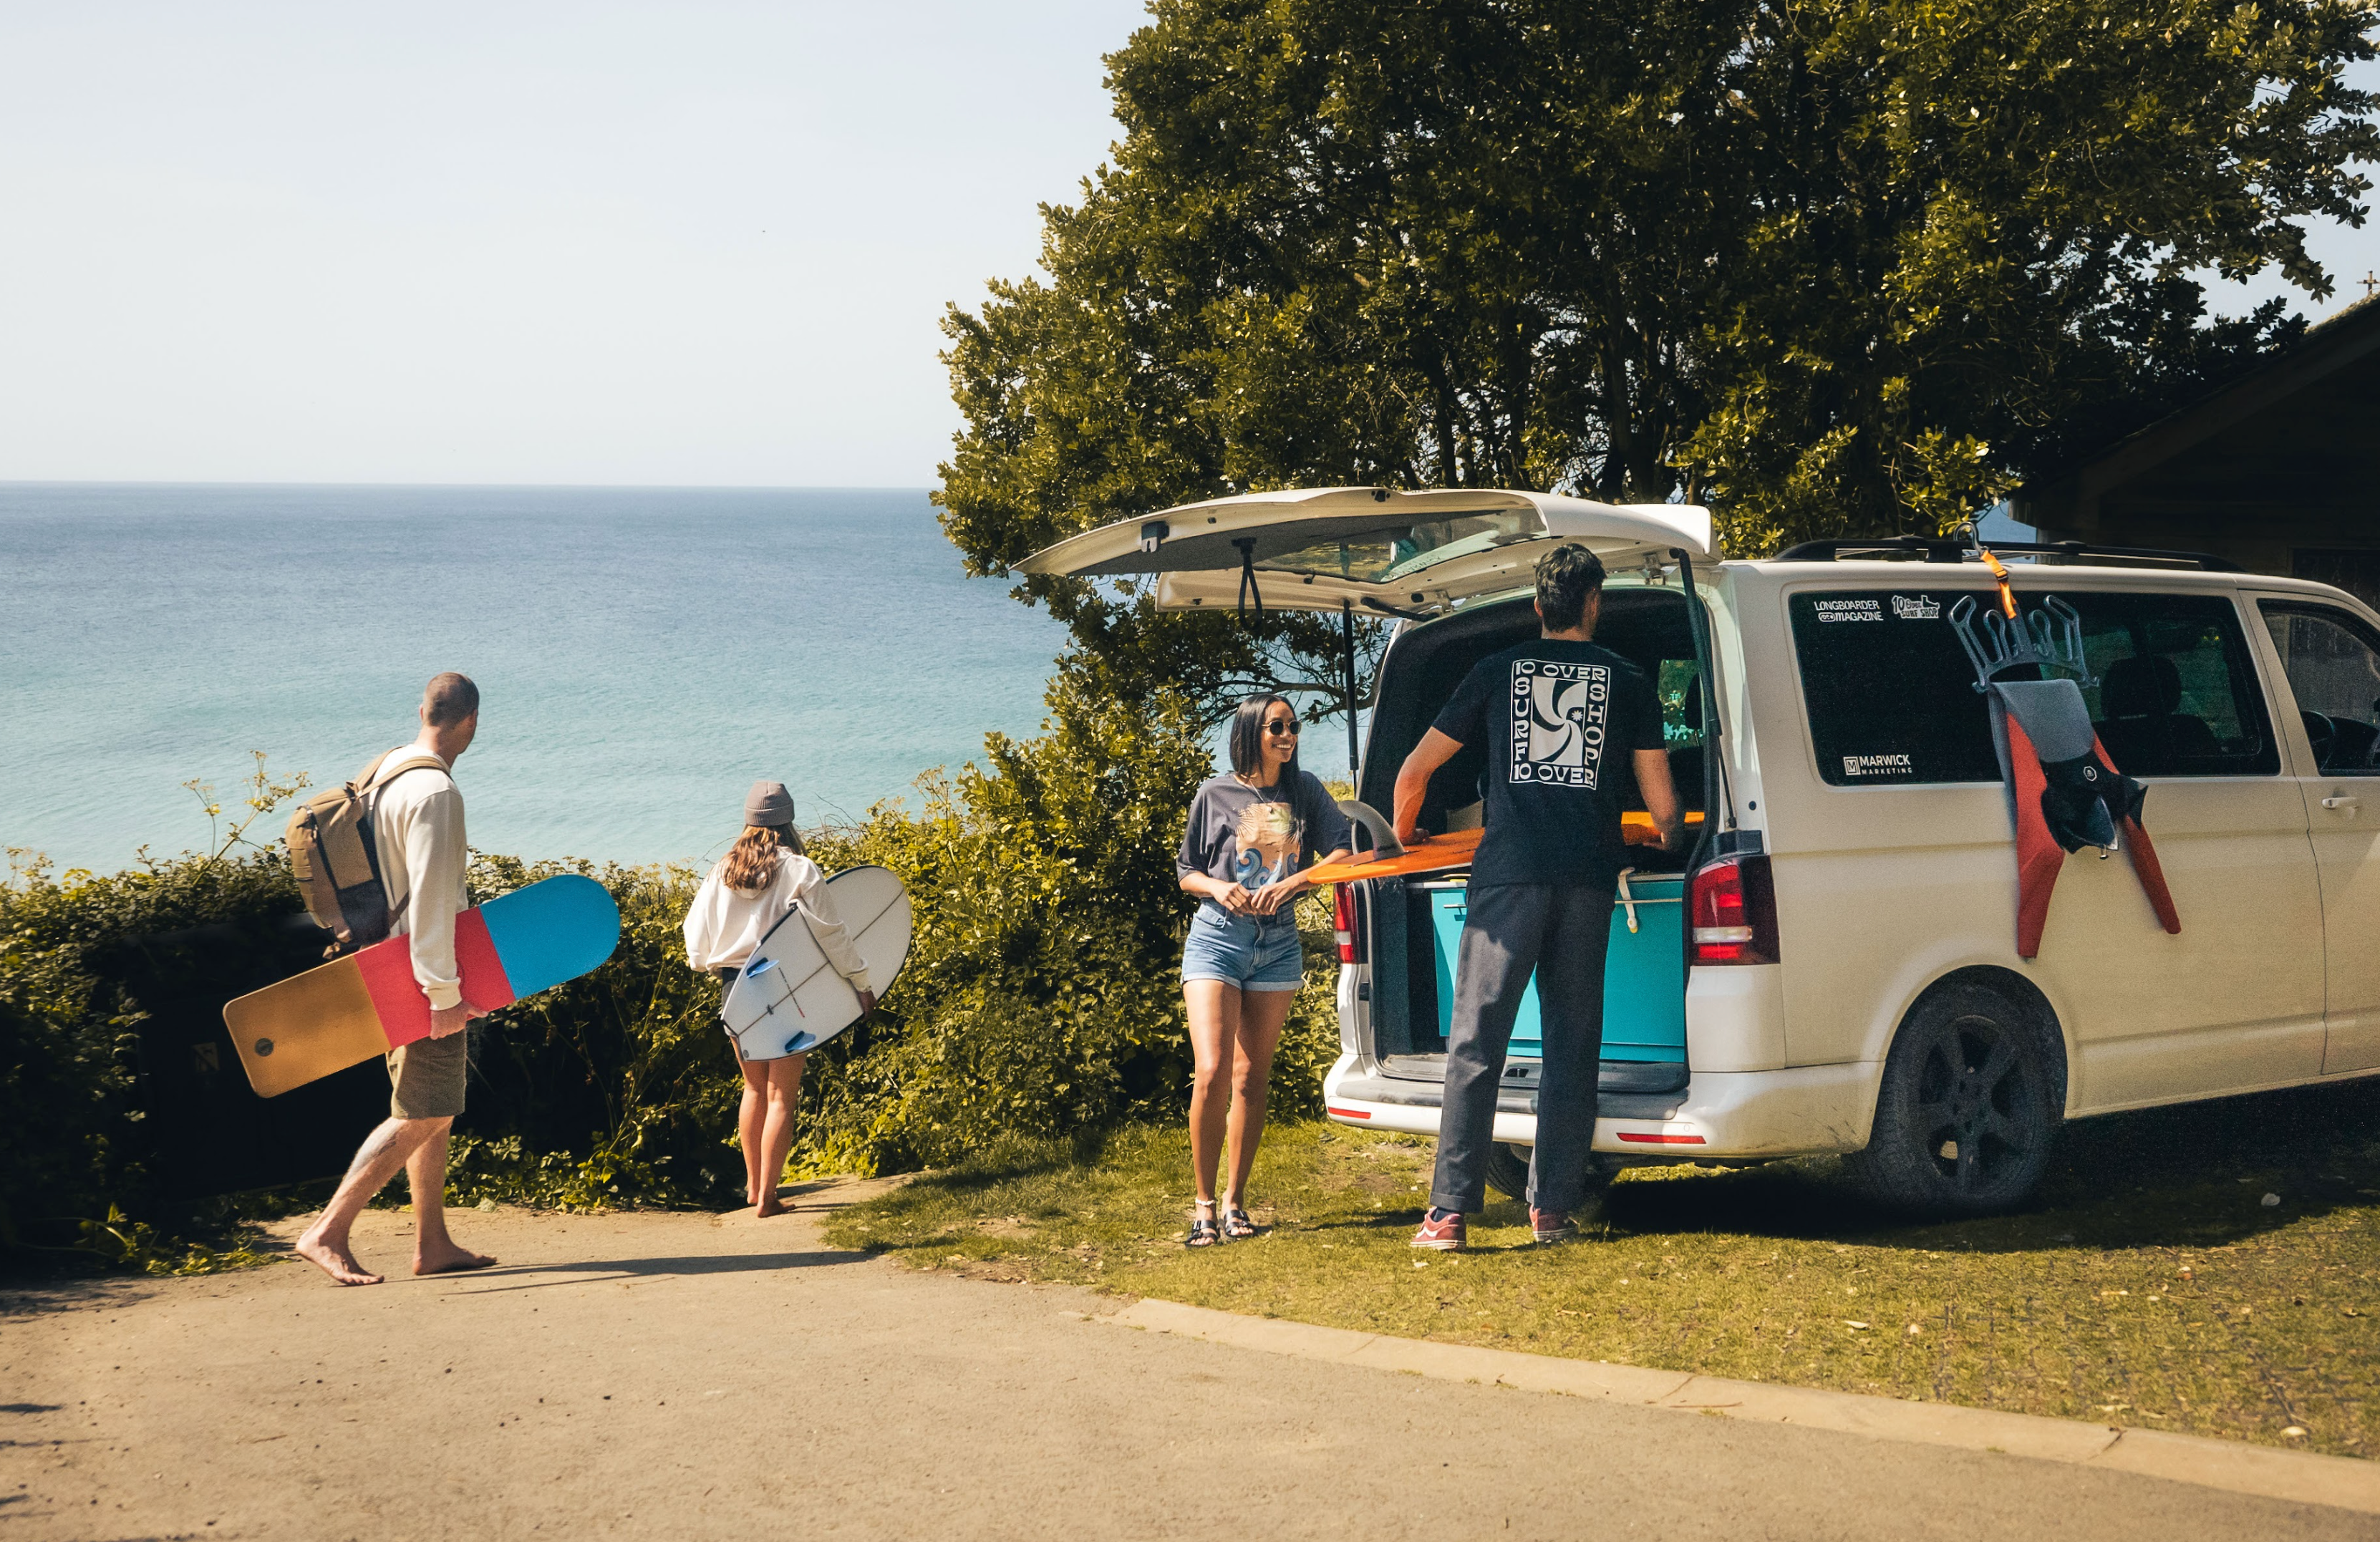 How To Plan A Surf Trip - a 5 step guide